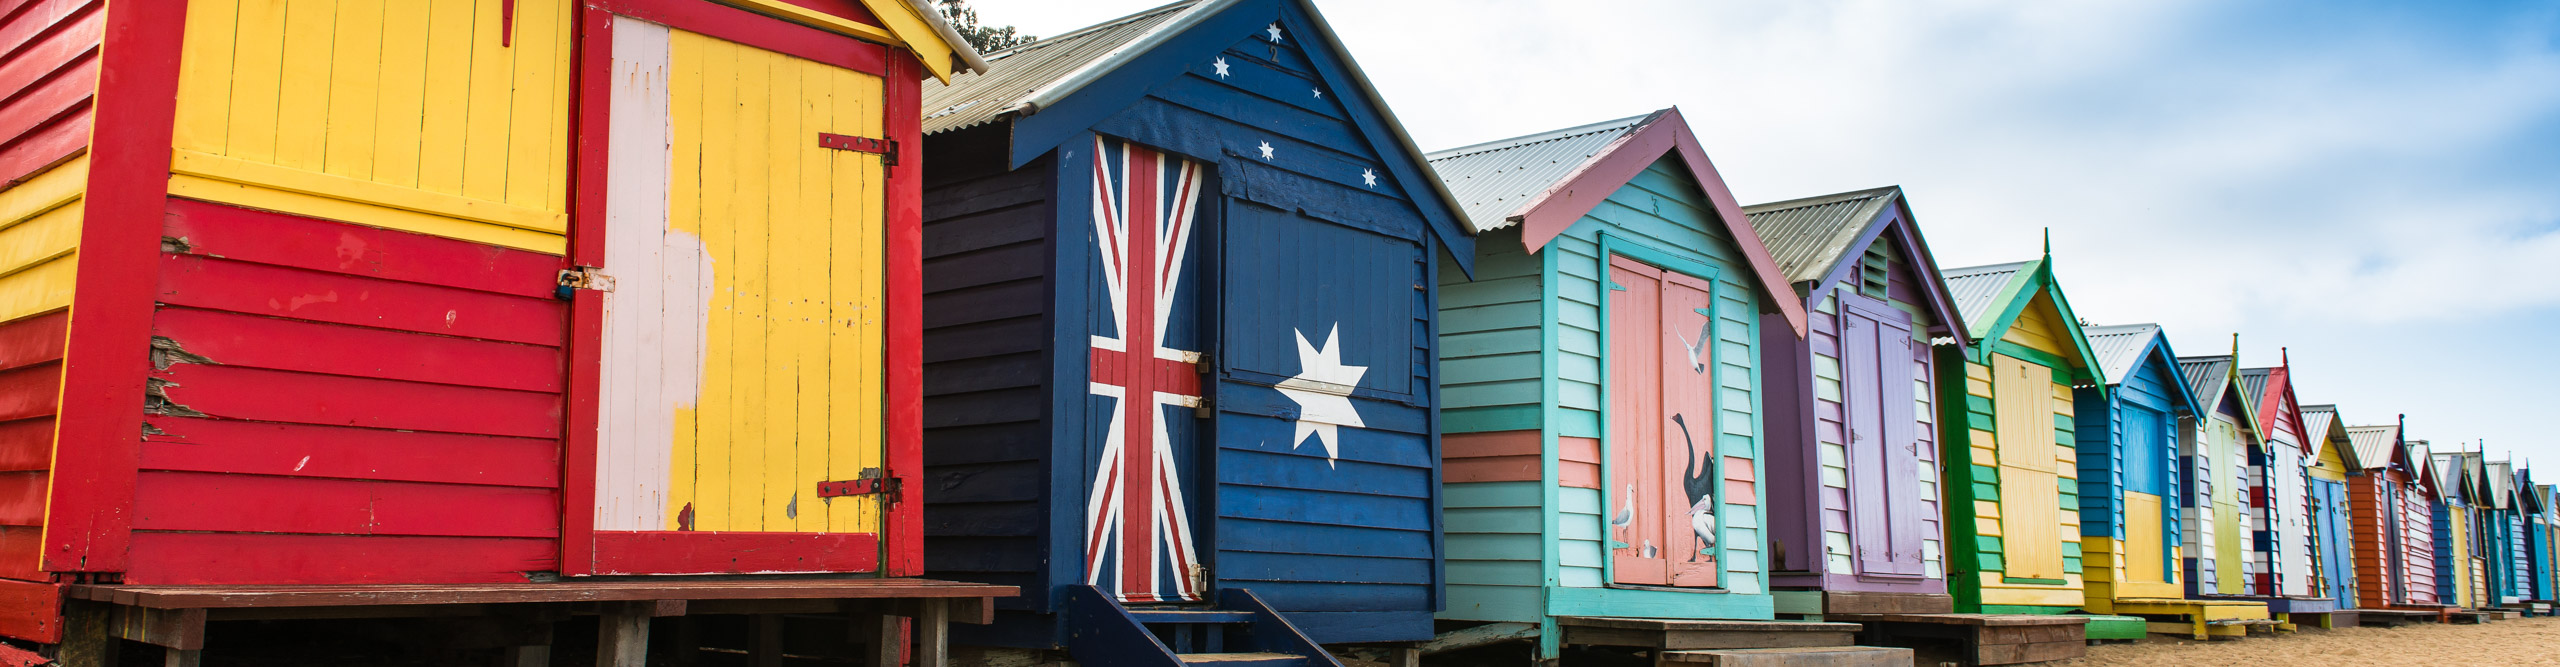 Brighton Beach huts, once painted with the Australian flag, Melbourne, Australia 